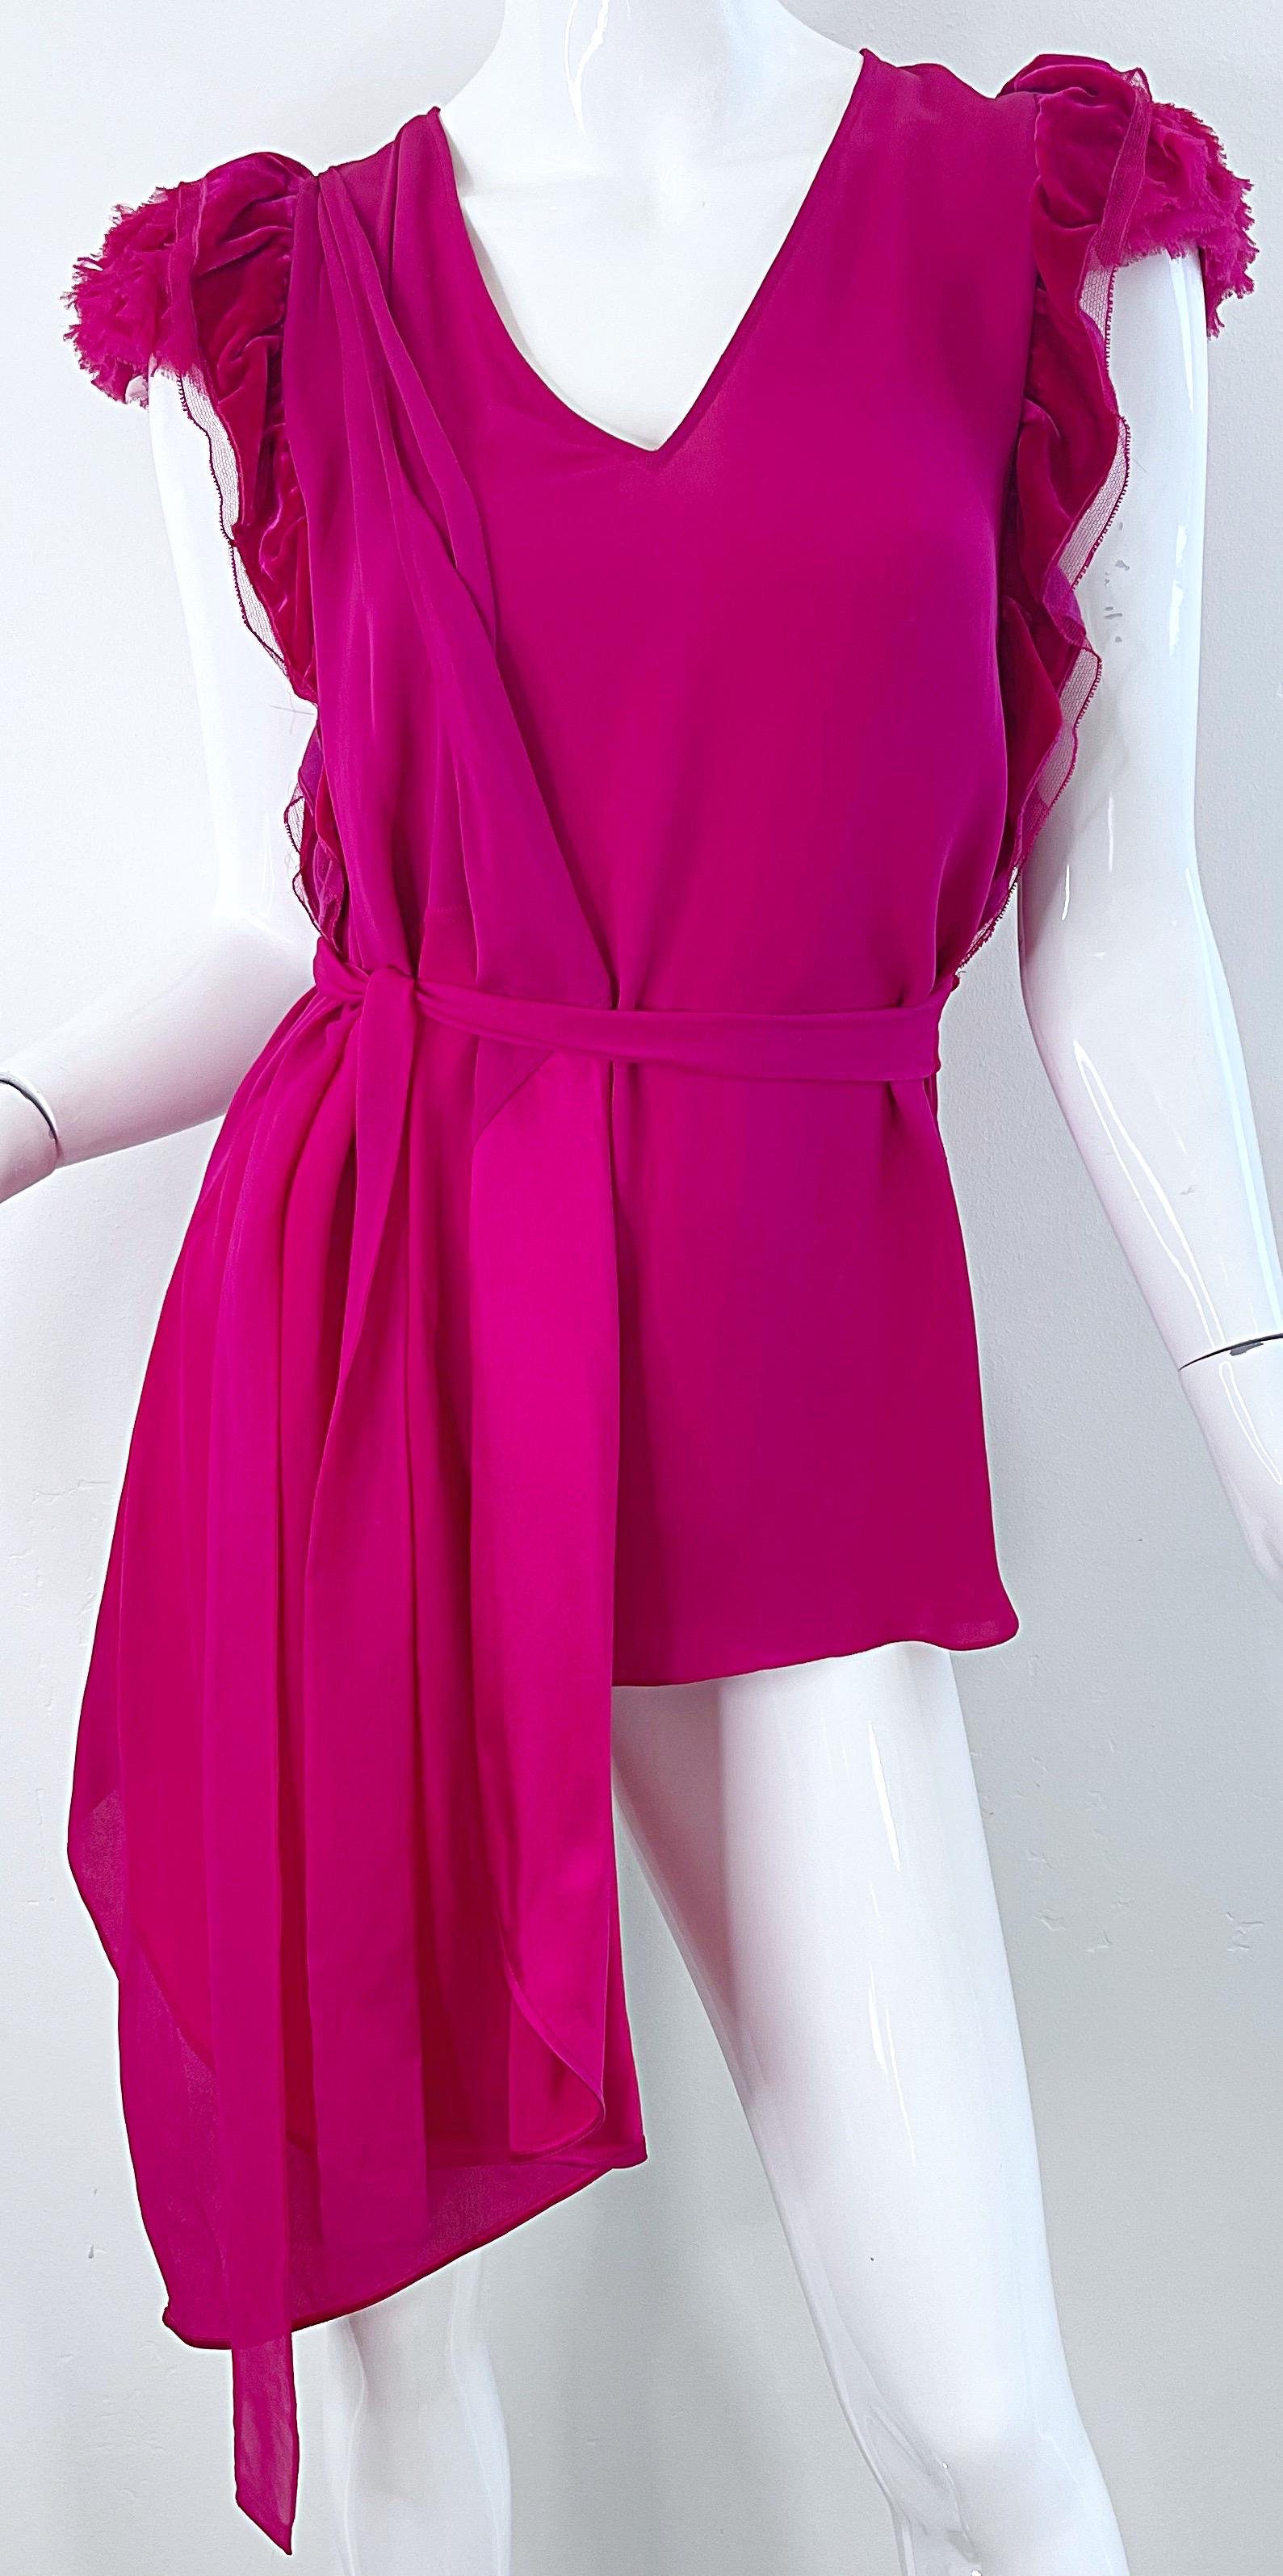 NWT Givenchy Spring 2020 Size 34 / 2 - 4 Hot Pink Fuchsia Silk Belted Blouse Top For Sale 8